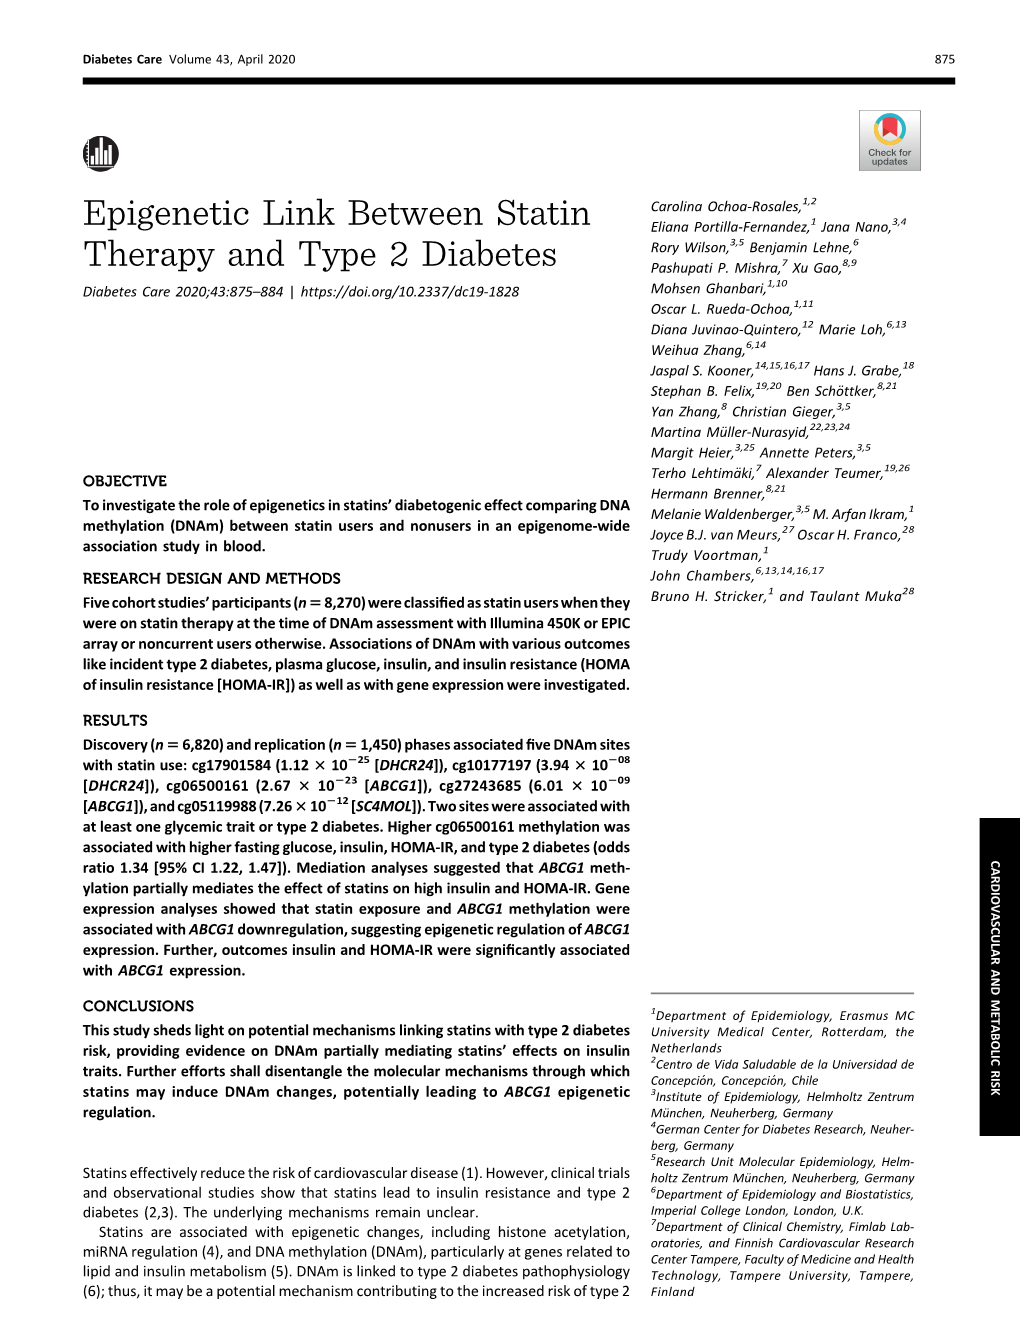 Epigenetic Link Between Statin Therapy and Type 2 Diabetes